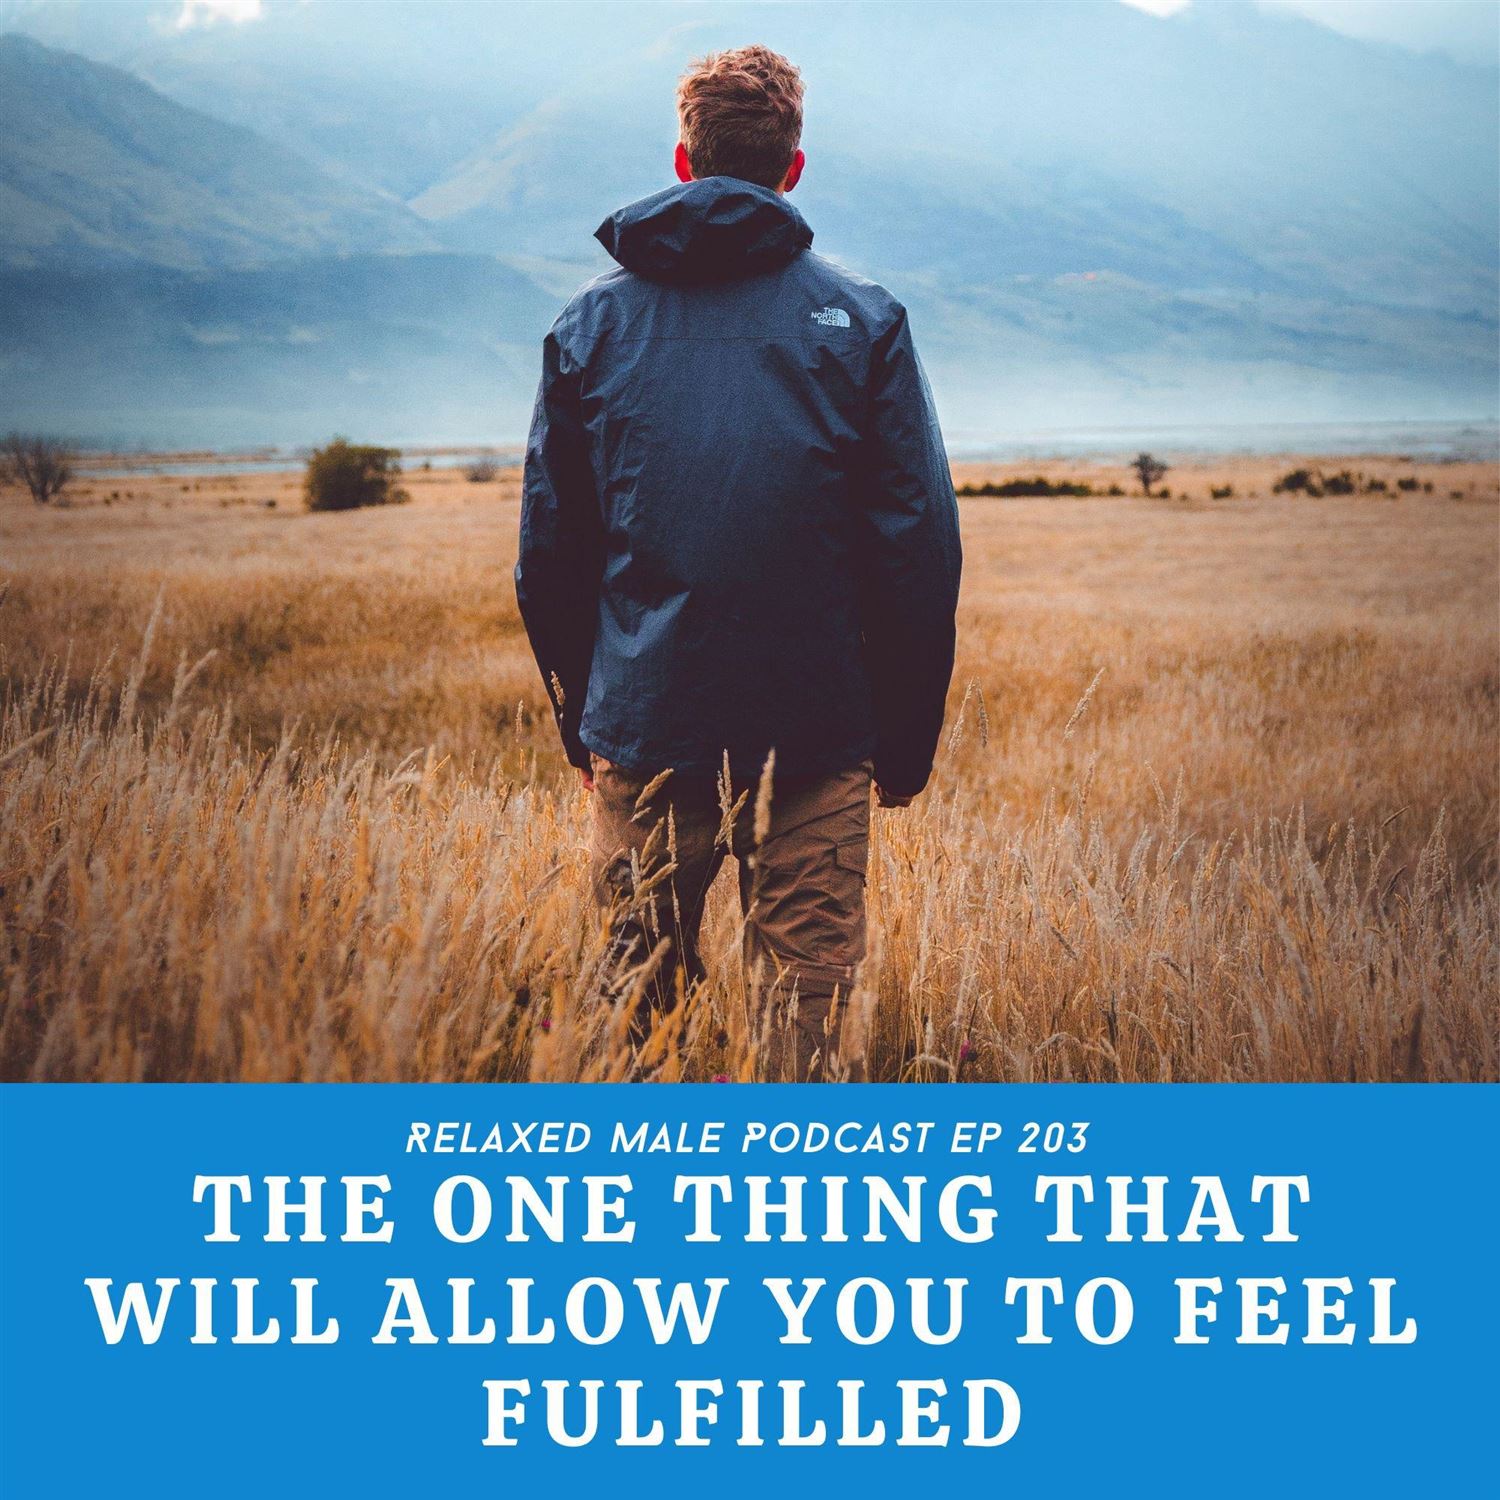 The One Thing That Will Allow You To Feel Fulfilled.